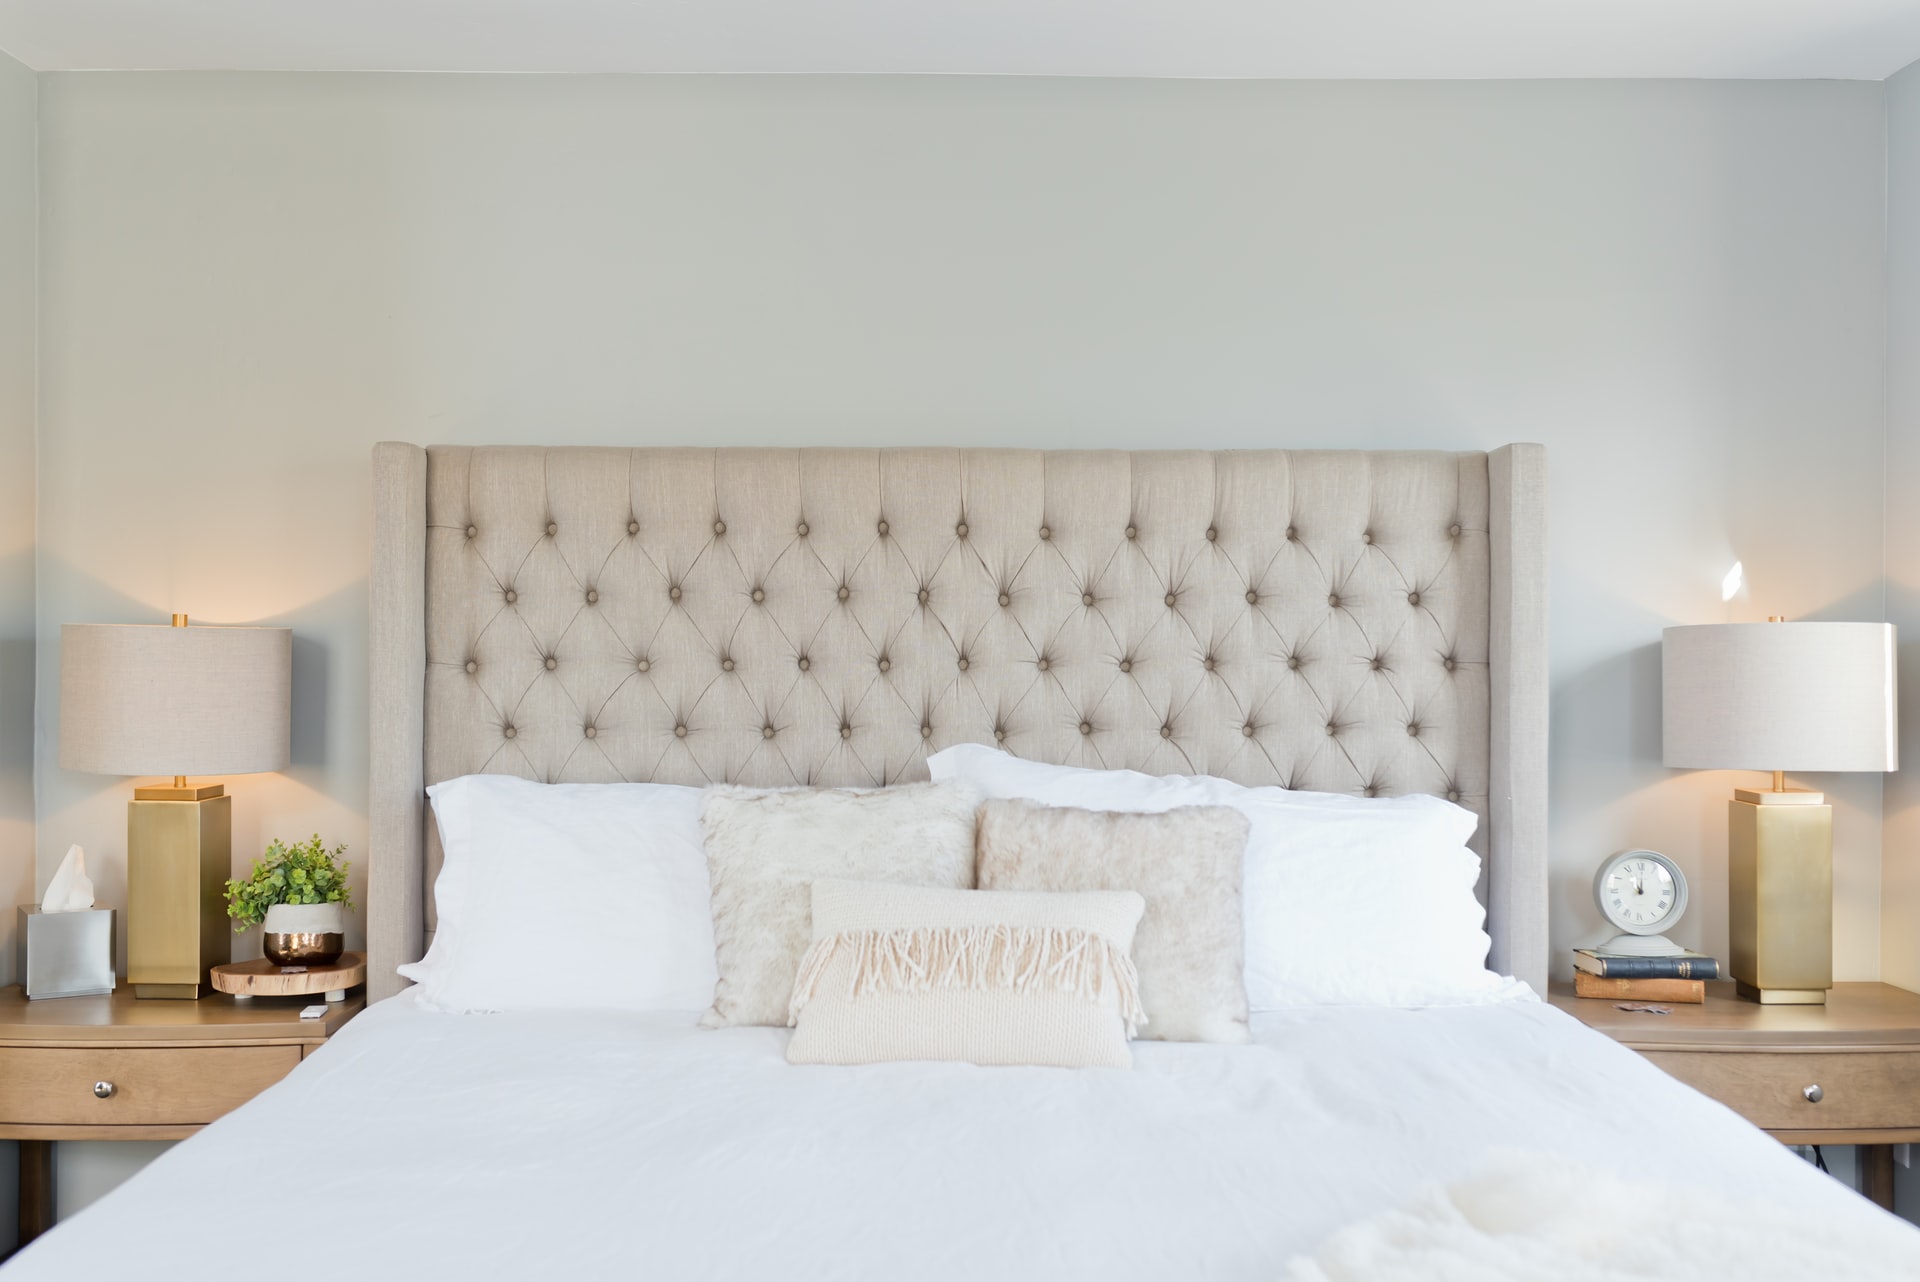 Bed with <strong>upholstered headboard</strong>. Cosy bedroom arrangement